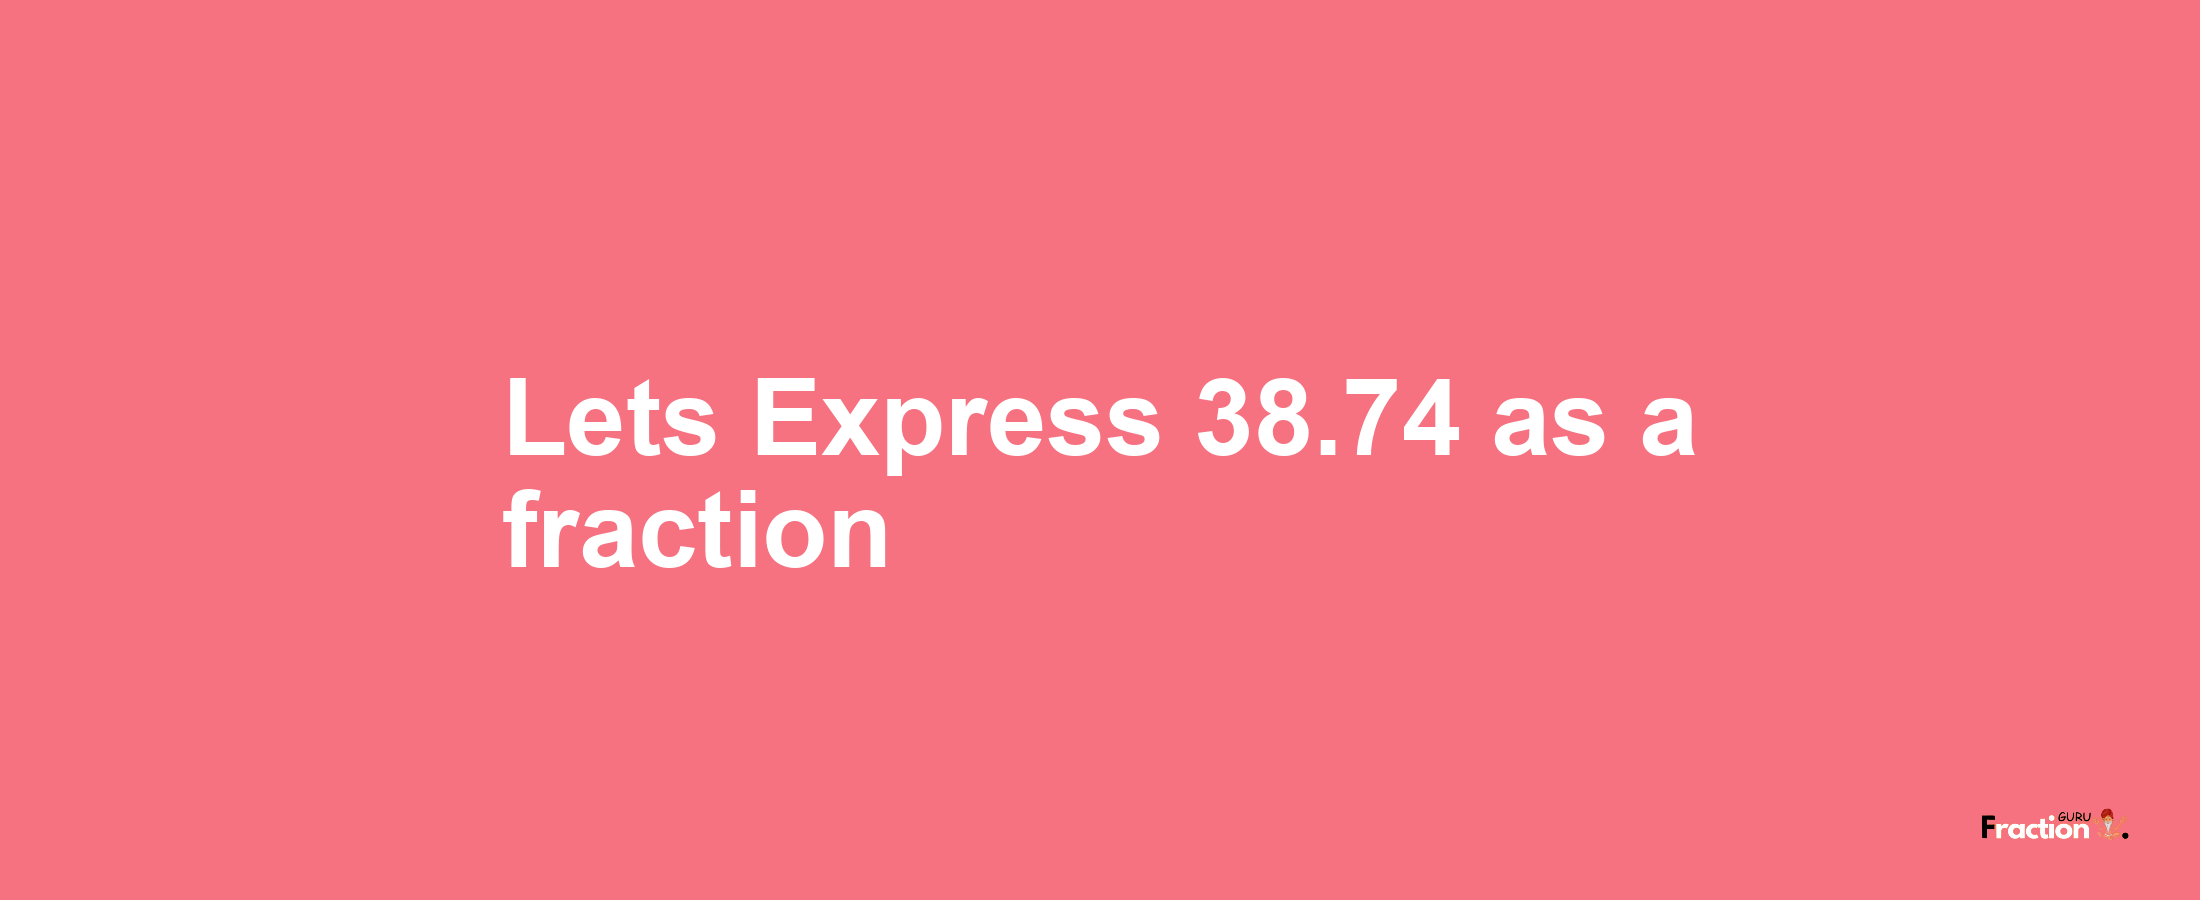 Lets Express 38.74 as afraction